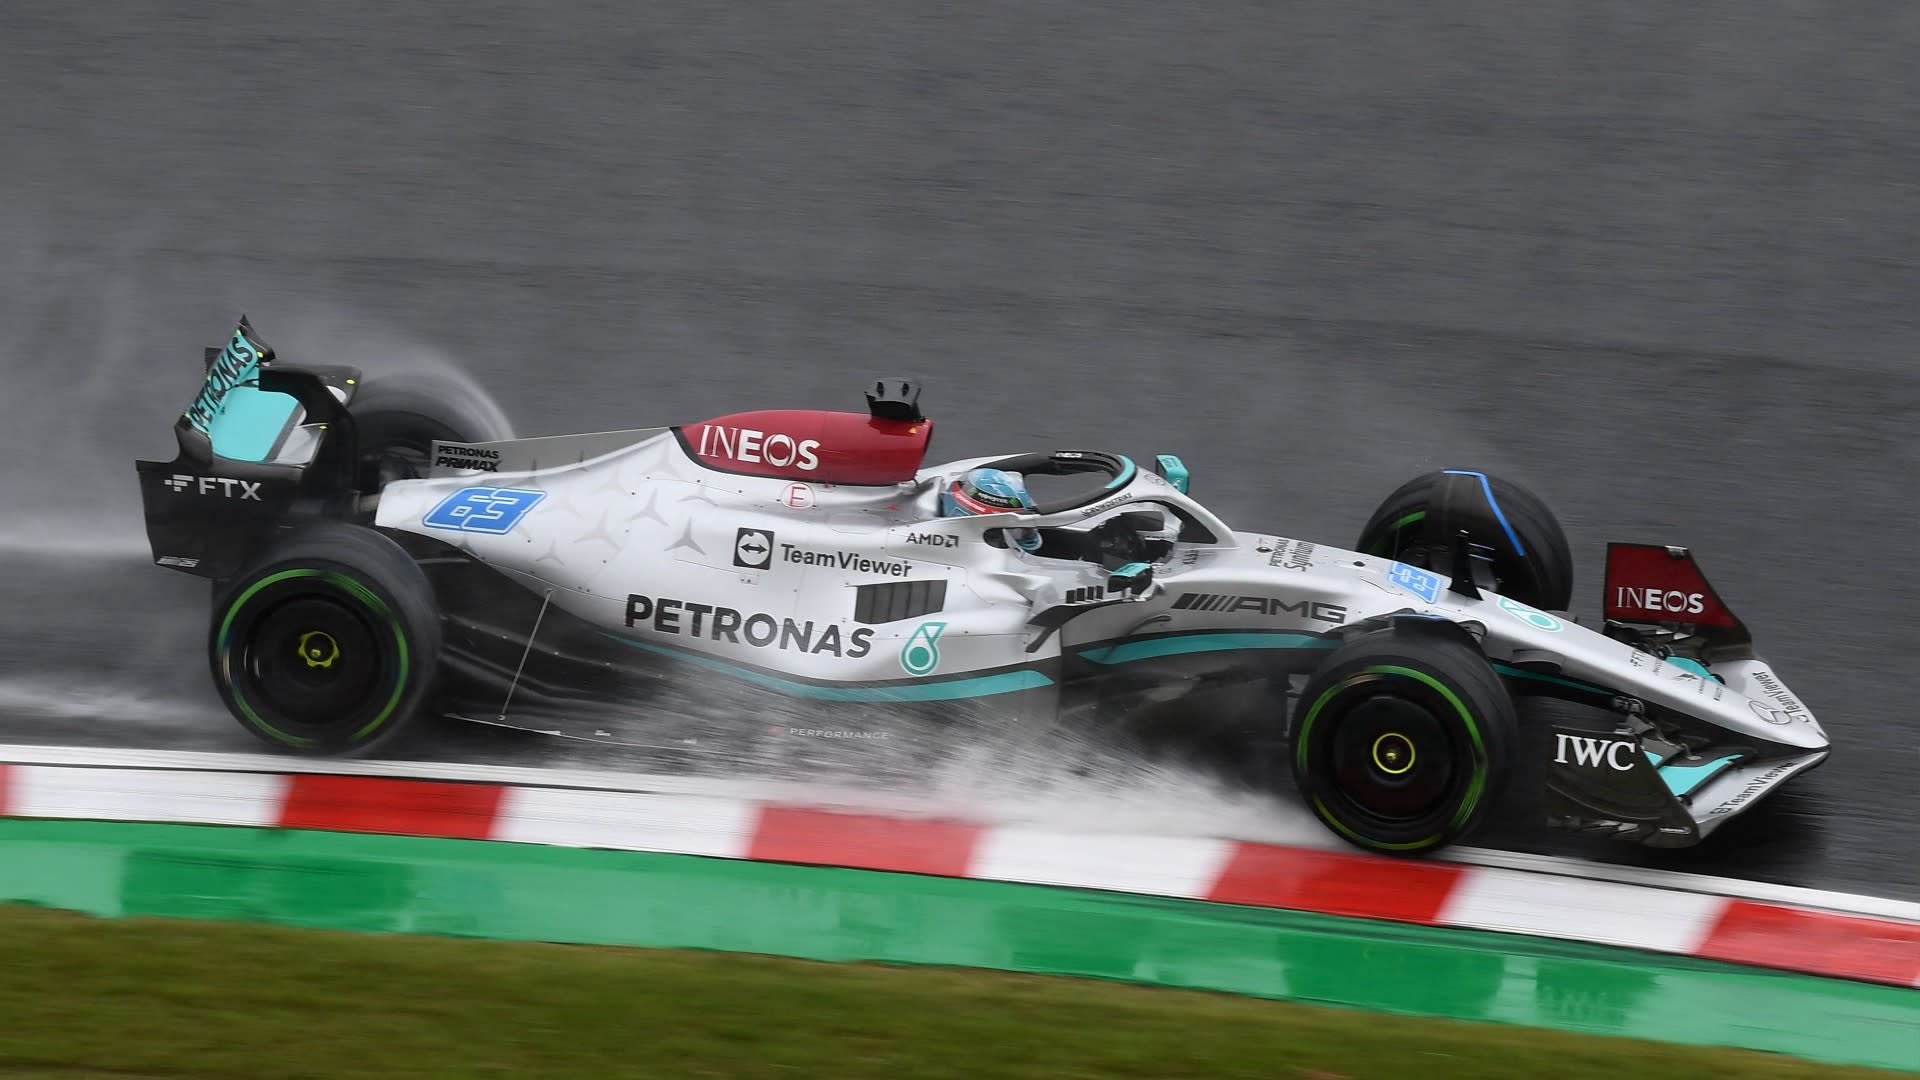 FP2 Russell leads Hamilton as Mercedes one-two in second practice at Suzuka Formula 1®